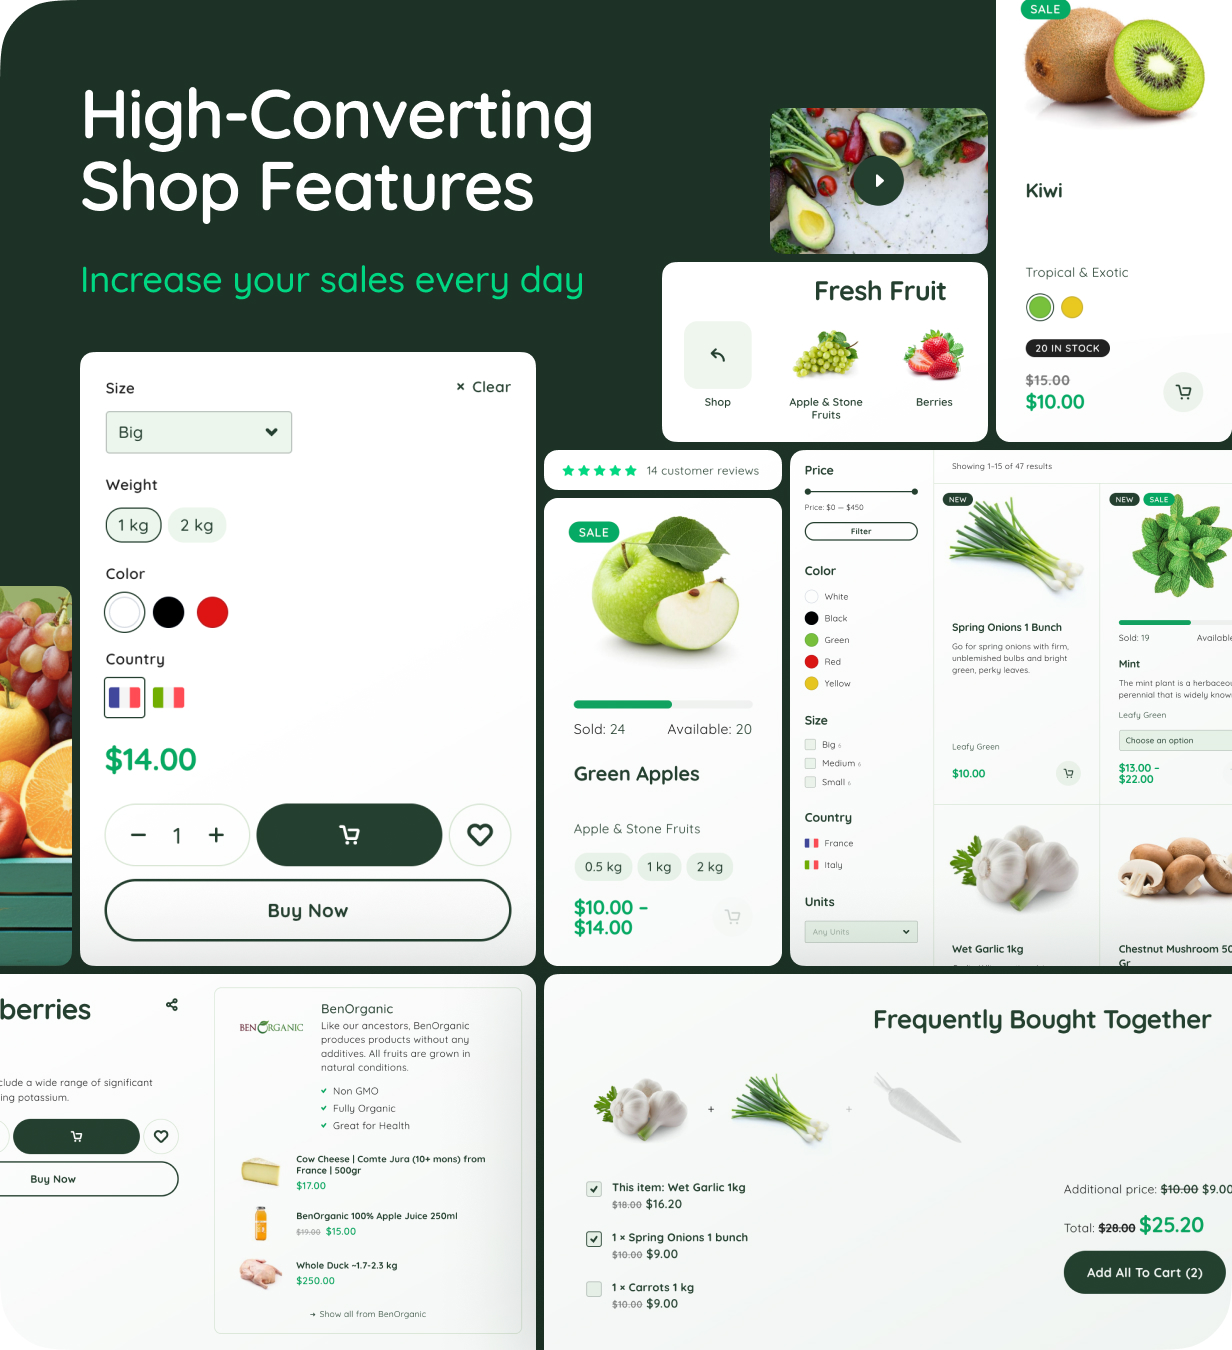 Tasty Daily - High Converting Shop Features